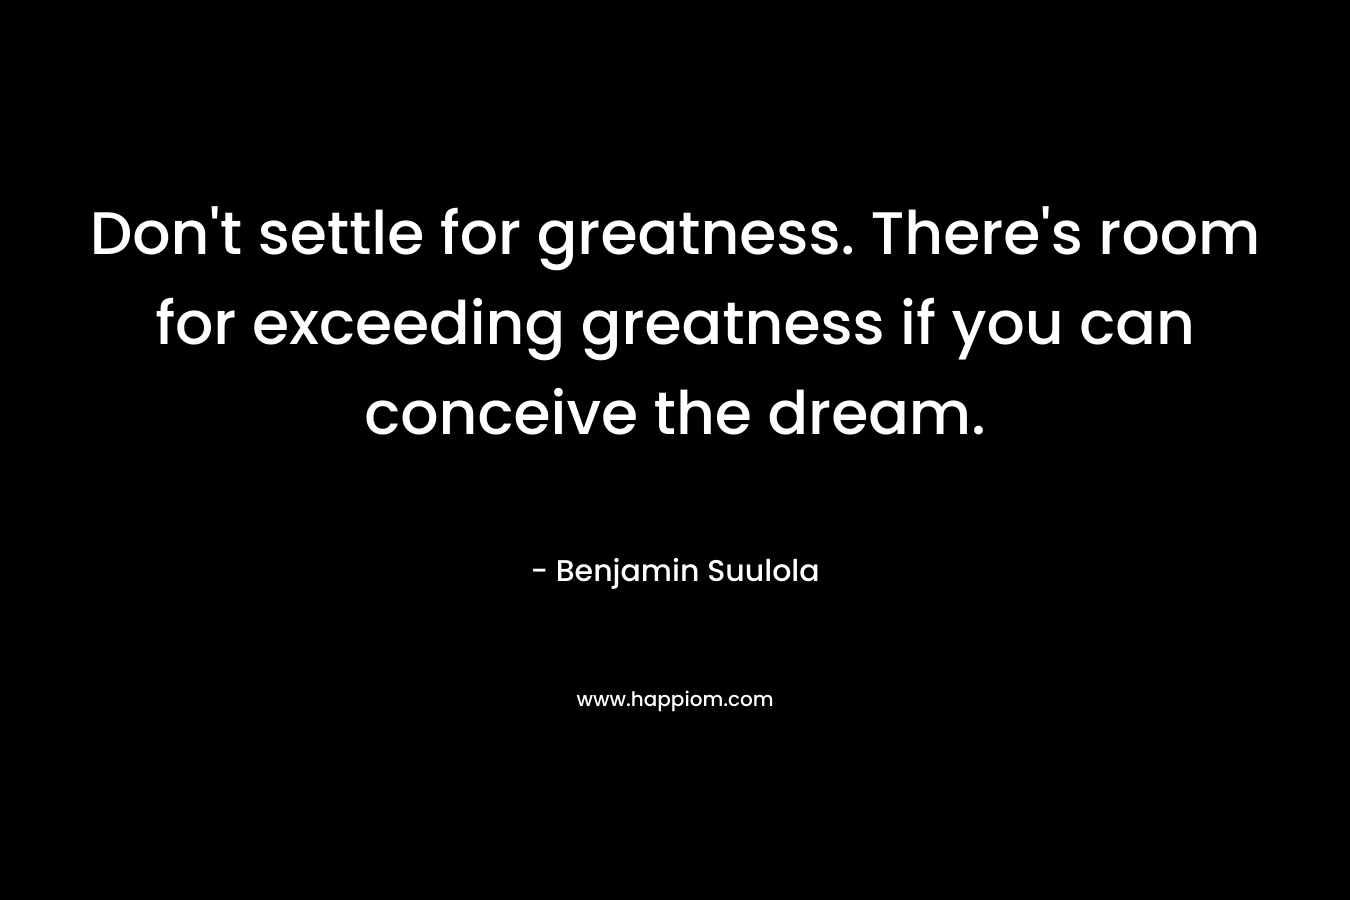 Don’t settle for greatness. There’s room for exceeding greatness if you can conceive the dream. – Benjamin Suulola